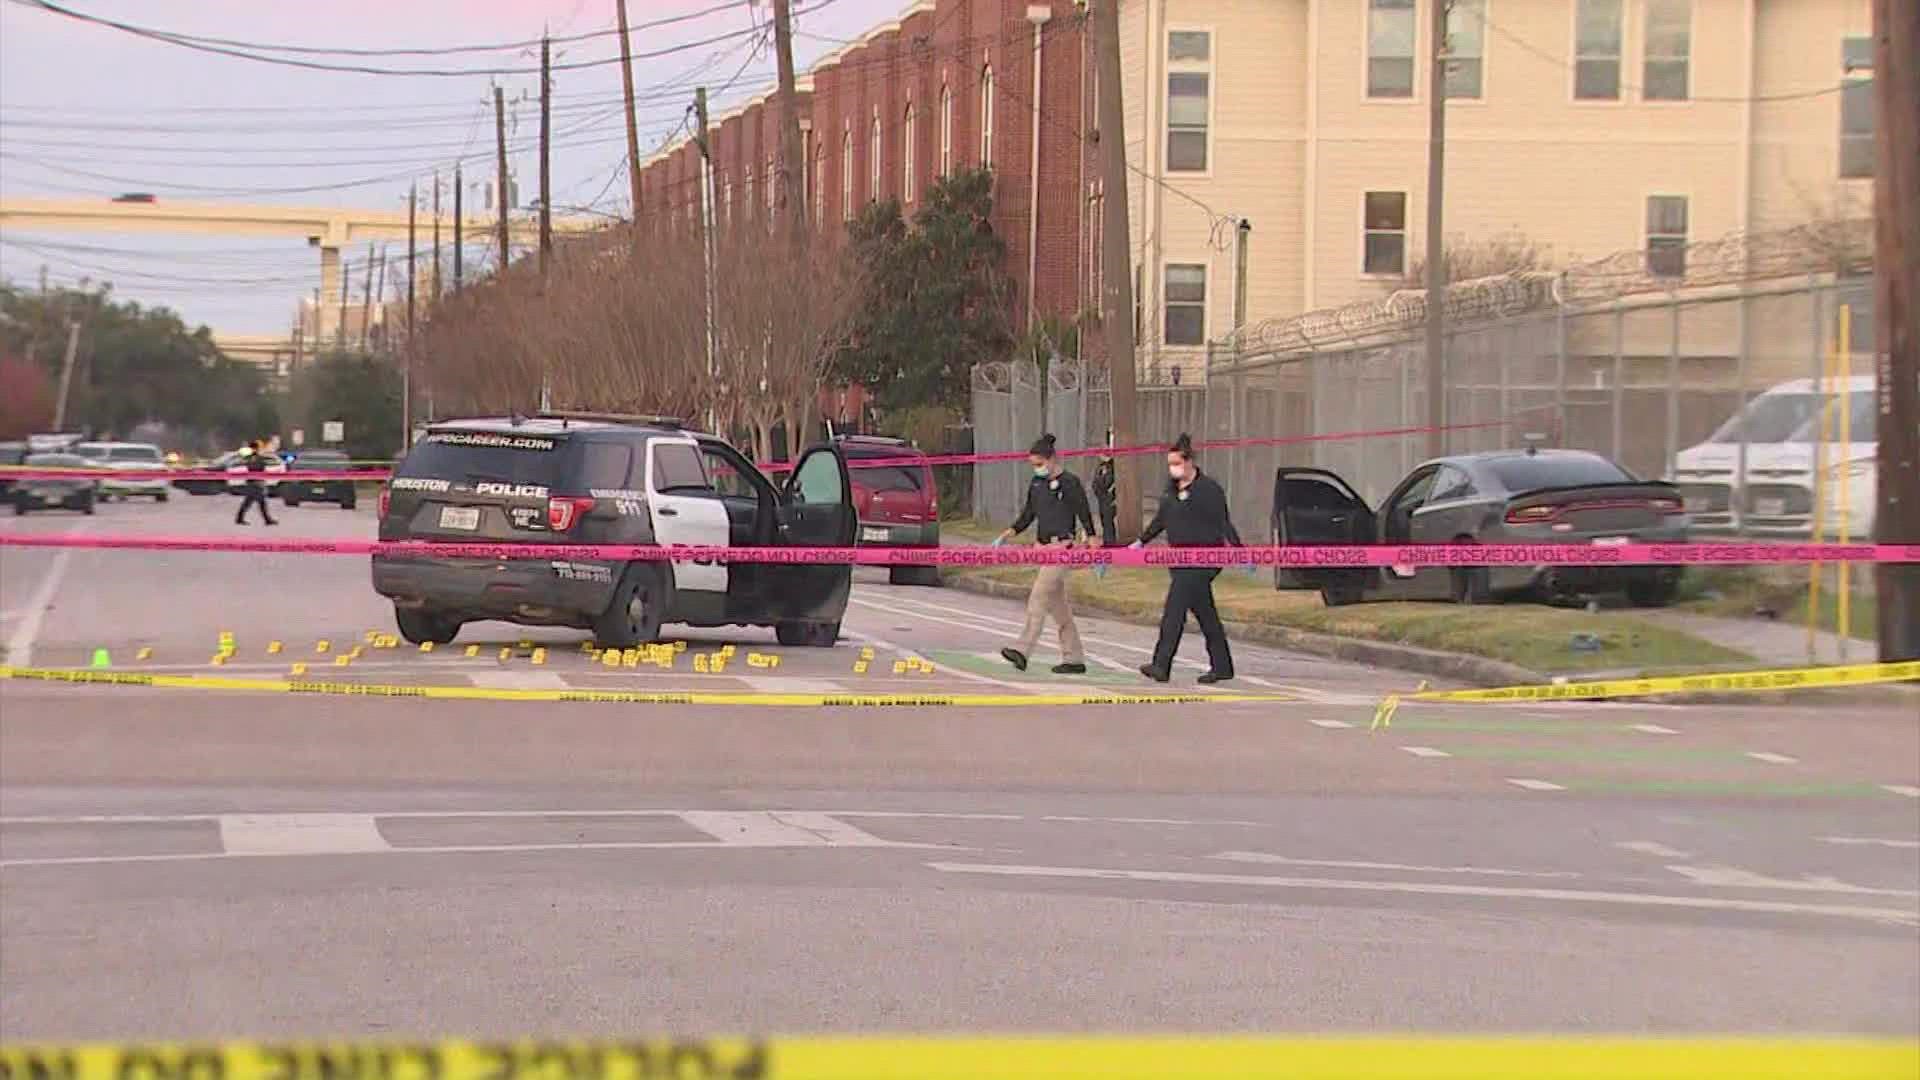 HPD said three officers were shot by Roland Caballero at the end of a chase in the Third Ward area. He was taken into custody after a standoff in the Fifth Ward.